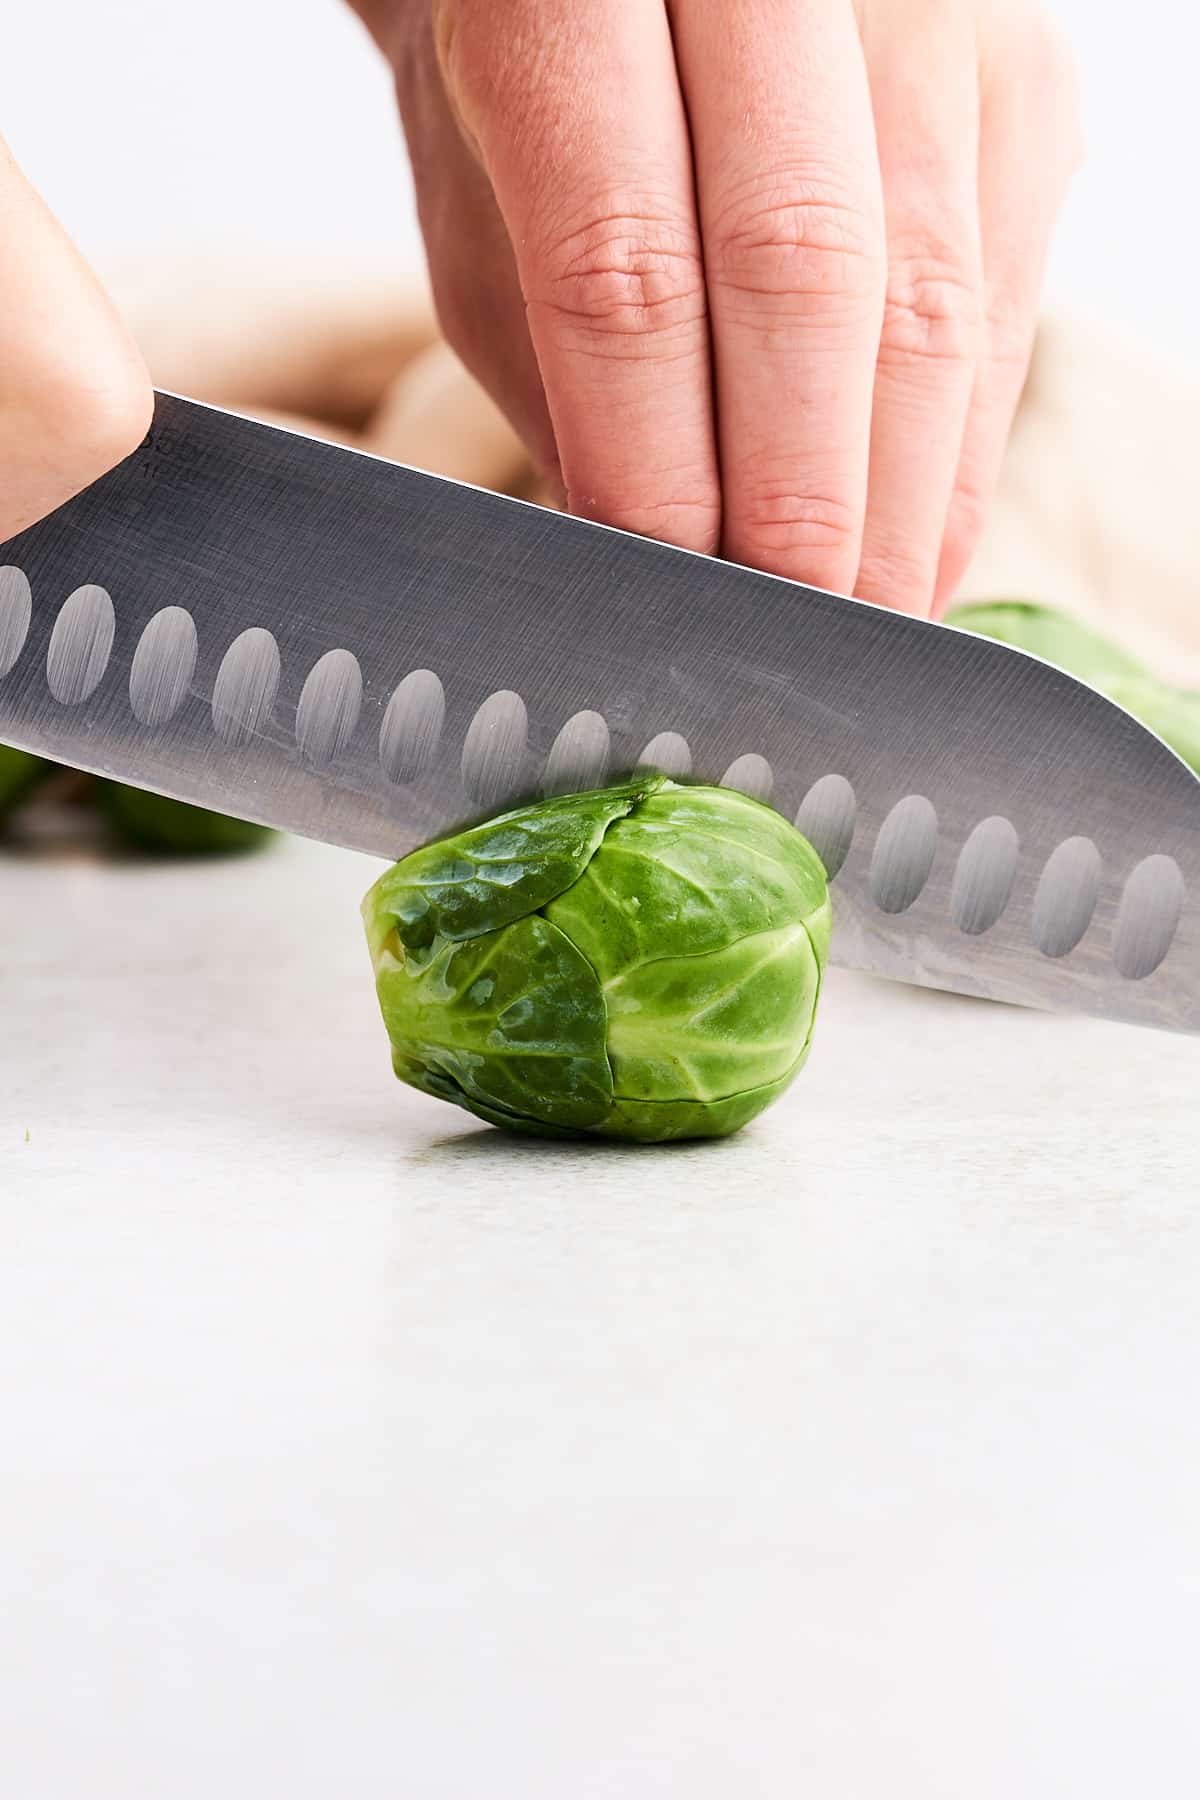 Cutting a Brussels sprout in half.